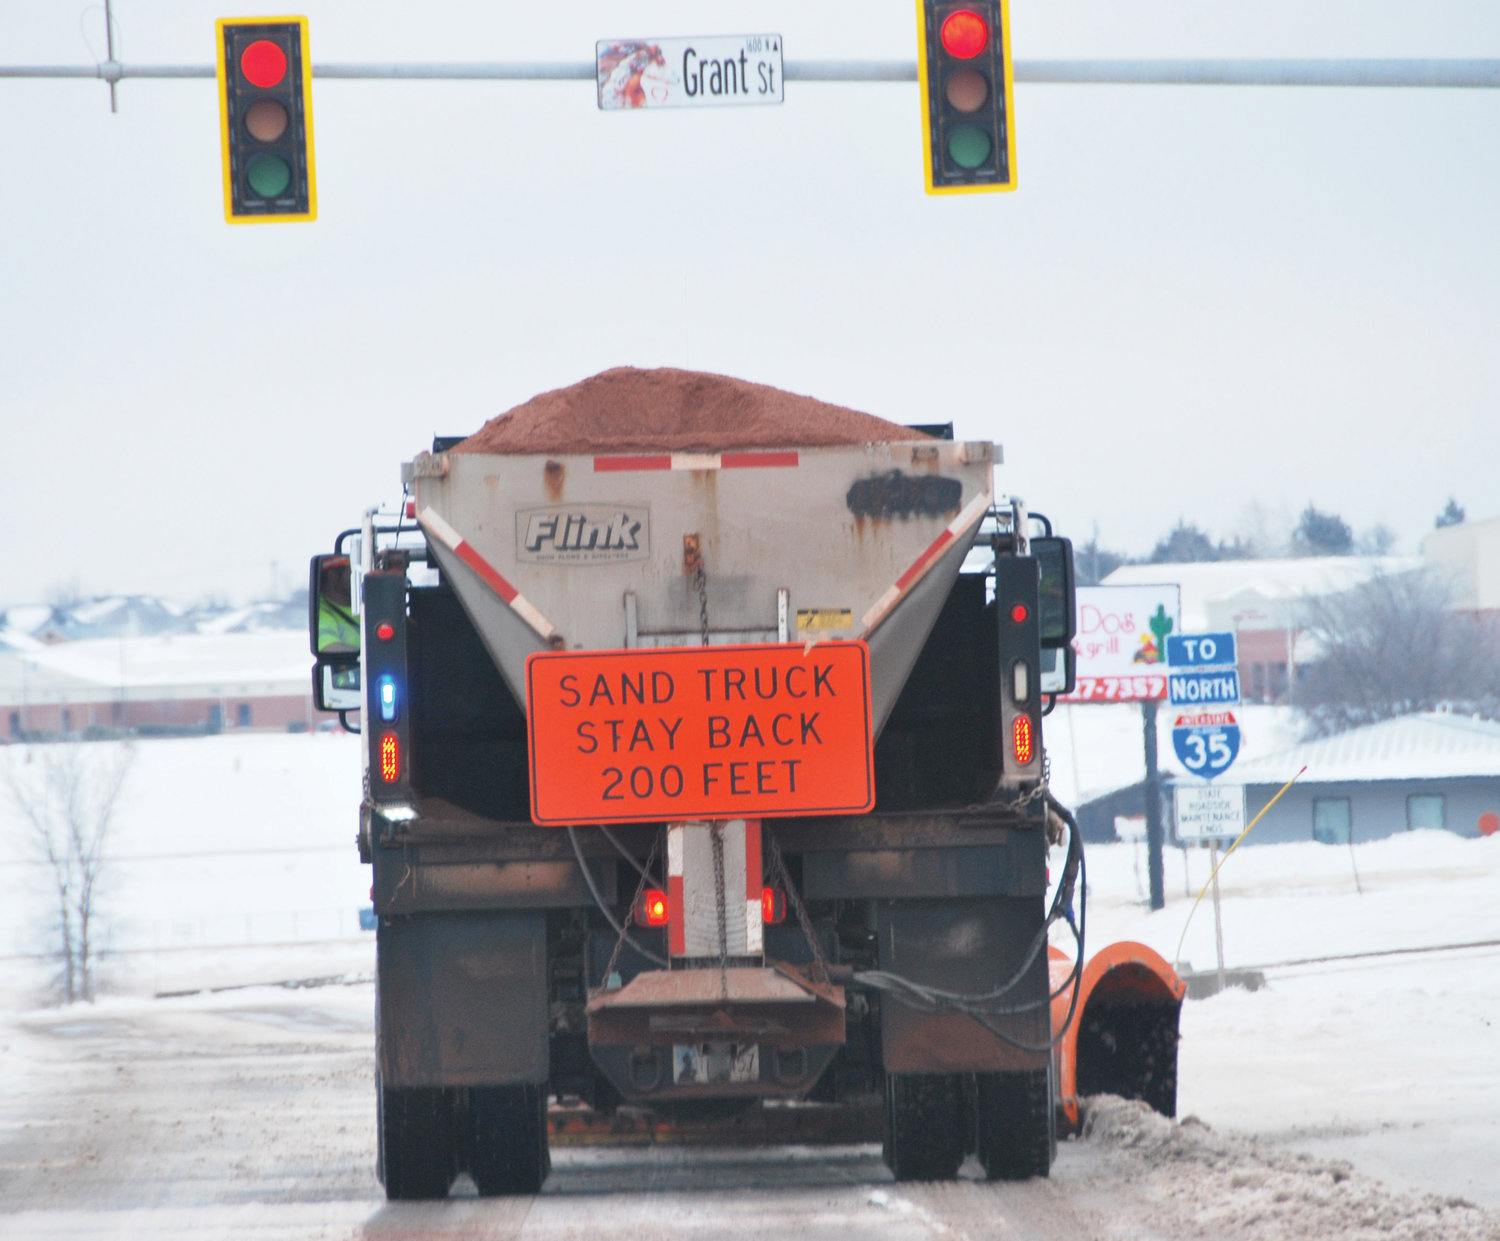 After ODOT vehicles plowed the ice after last Wednesday and Thursday’s ice storm they also threw sand on the road to give vehicles better traction.